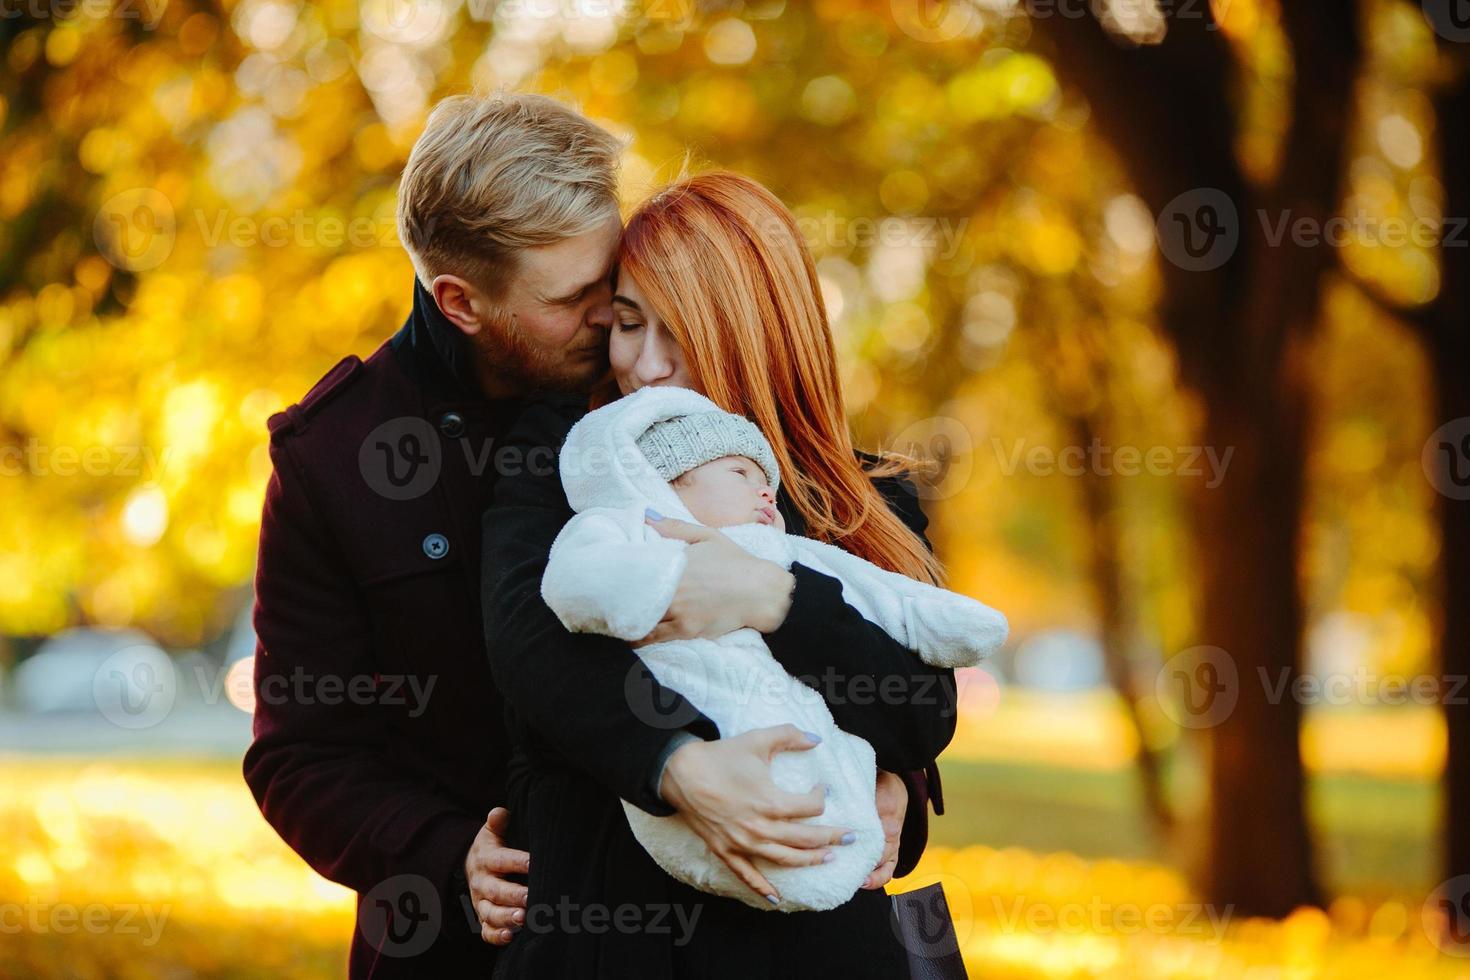 young family and newborn son in autumn park photo